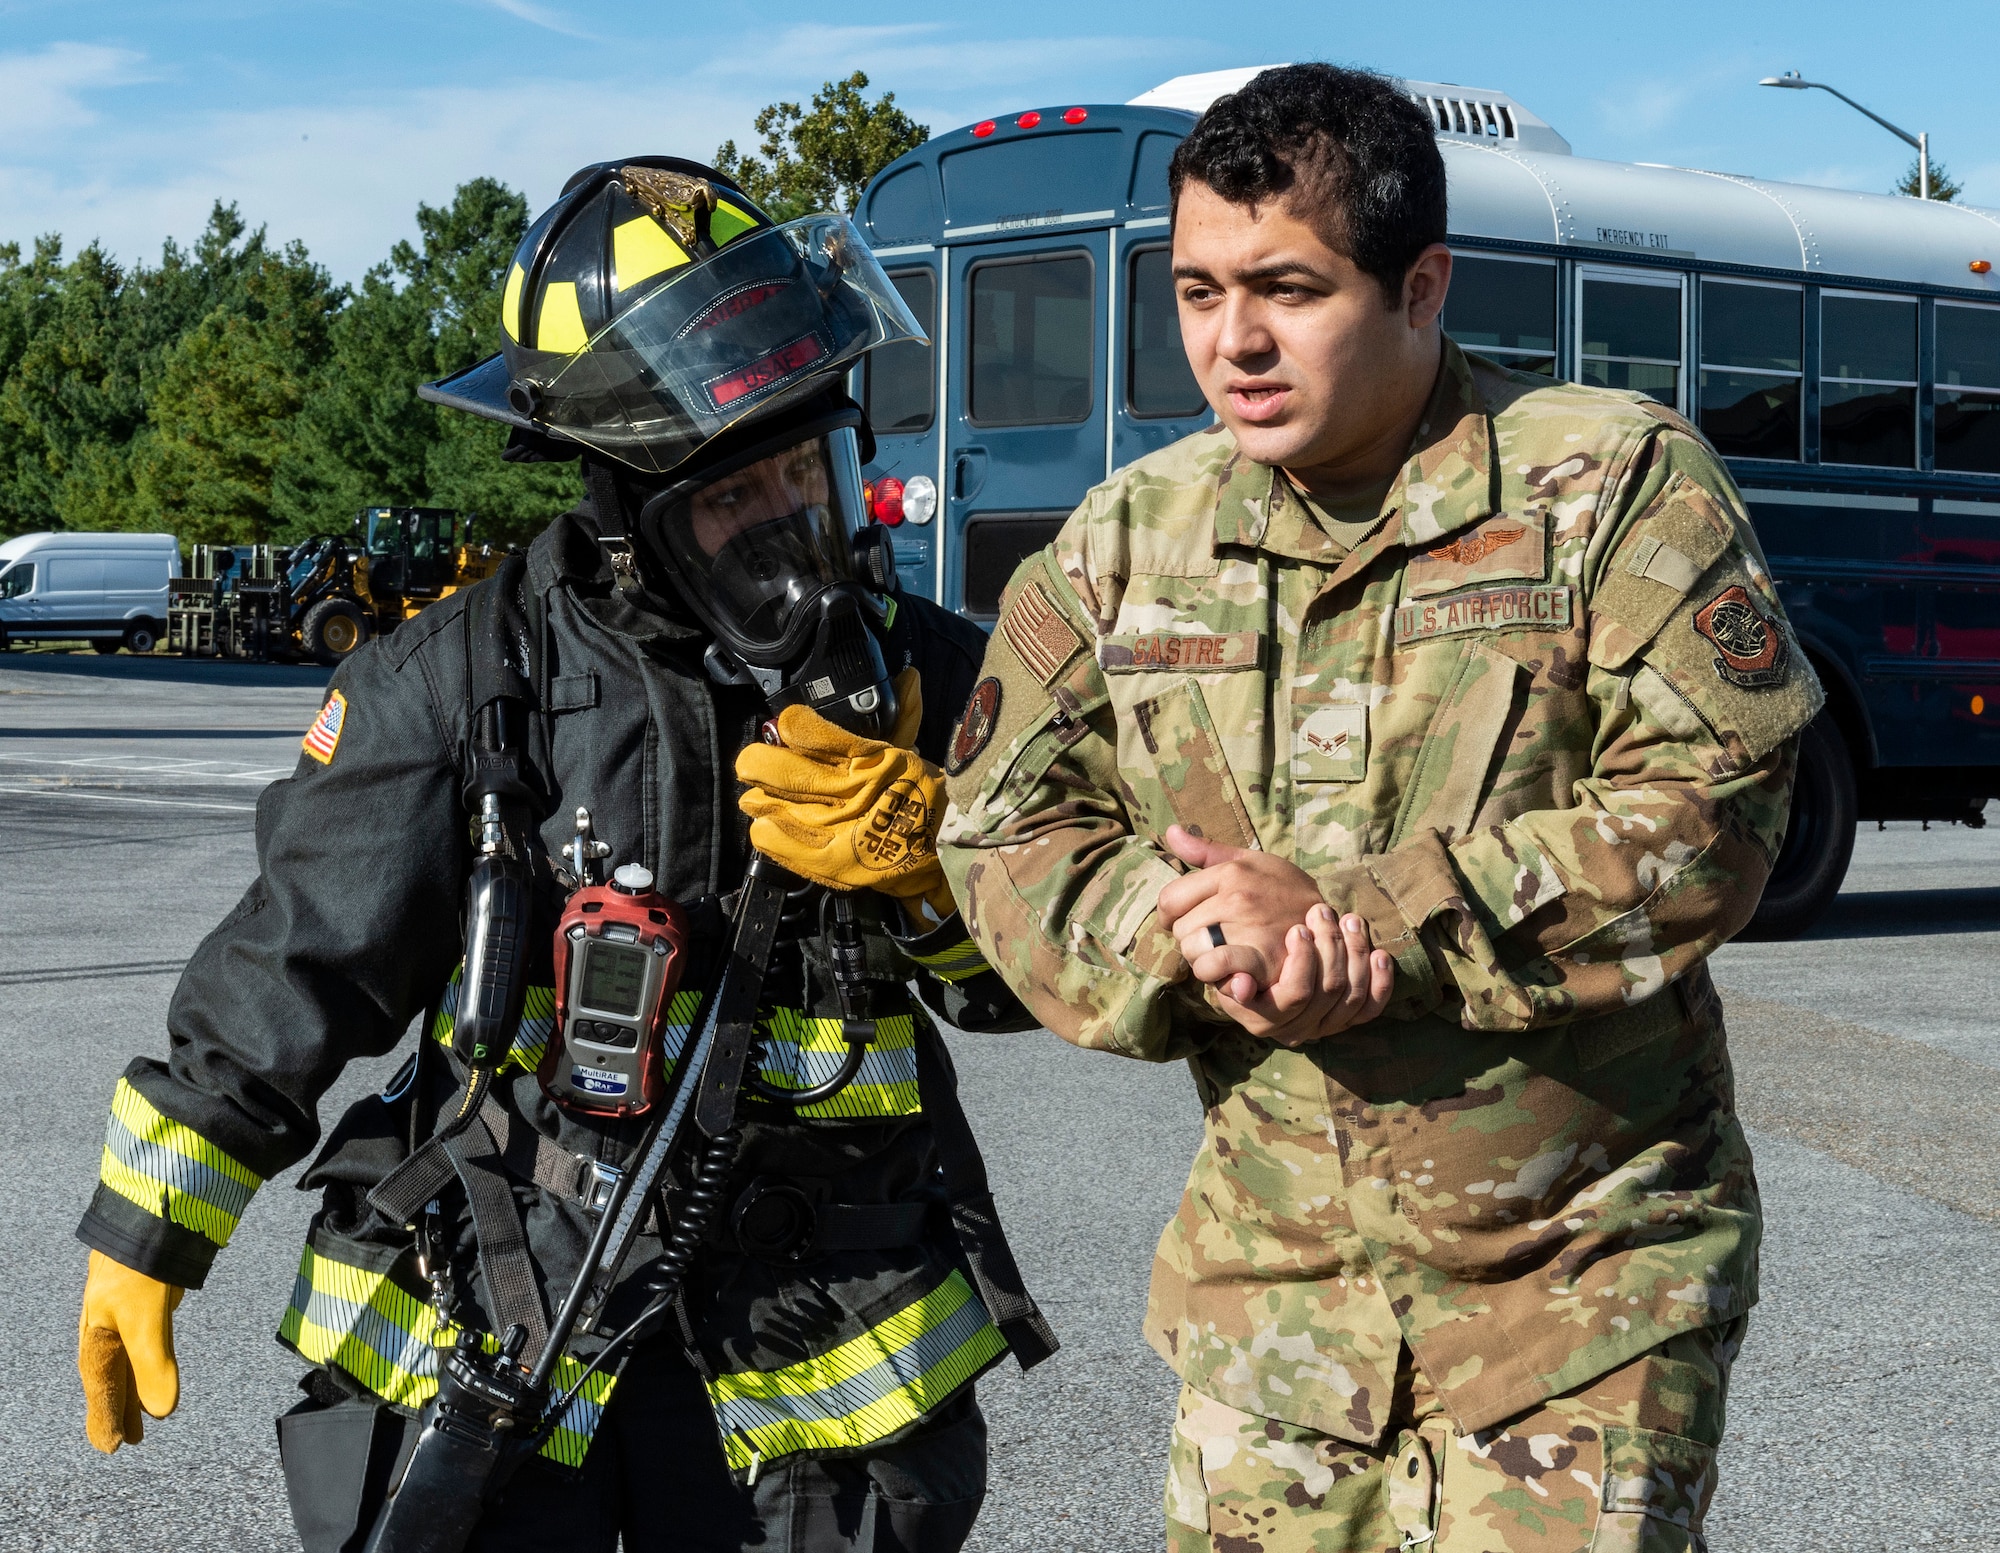 Maria Quinones, right, 436th Civil Engineer Squadron fire department firefighter, escorts Airman 1st Class Miguel Sastre, 9th Airlift Squadron loadmaster, to a triage area during a Force Protection Major Accident Response Exercise at Dover Air Force Base, Delaware, Oct. 7, 2021. The three-day exercise tested the response capabilities of Team Dover through various scenarios in an effort to strengthen their ability to provide rapid-global mobility in challenging conditions. (U.S. Air Force photo by Roland Balik)